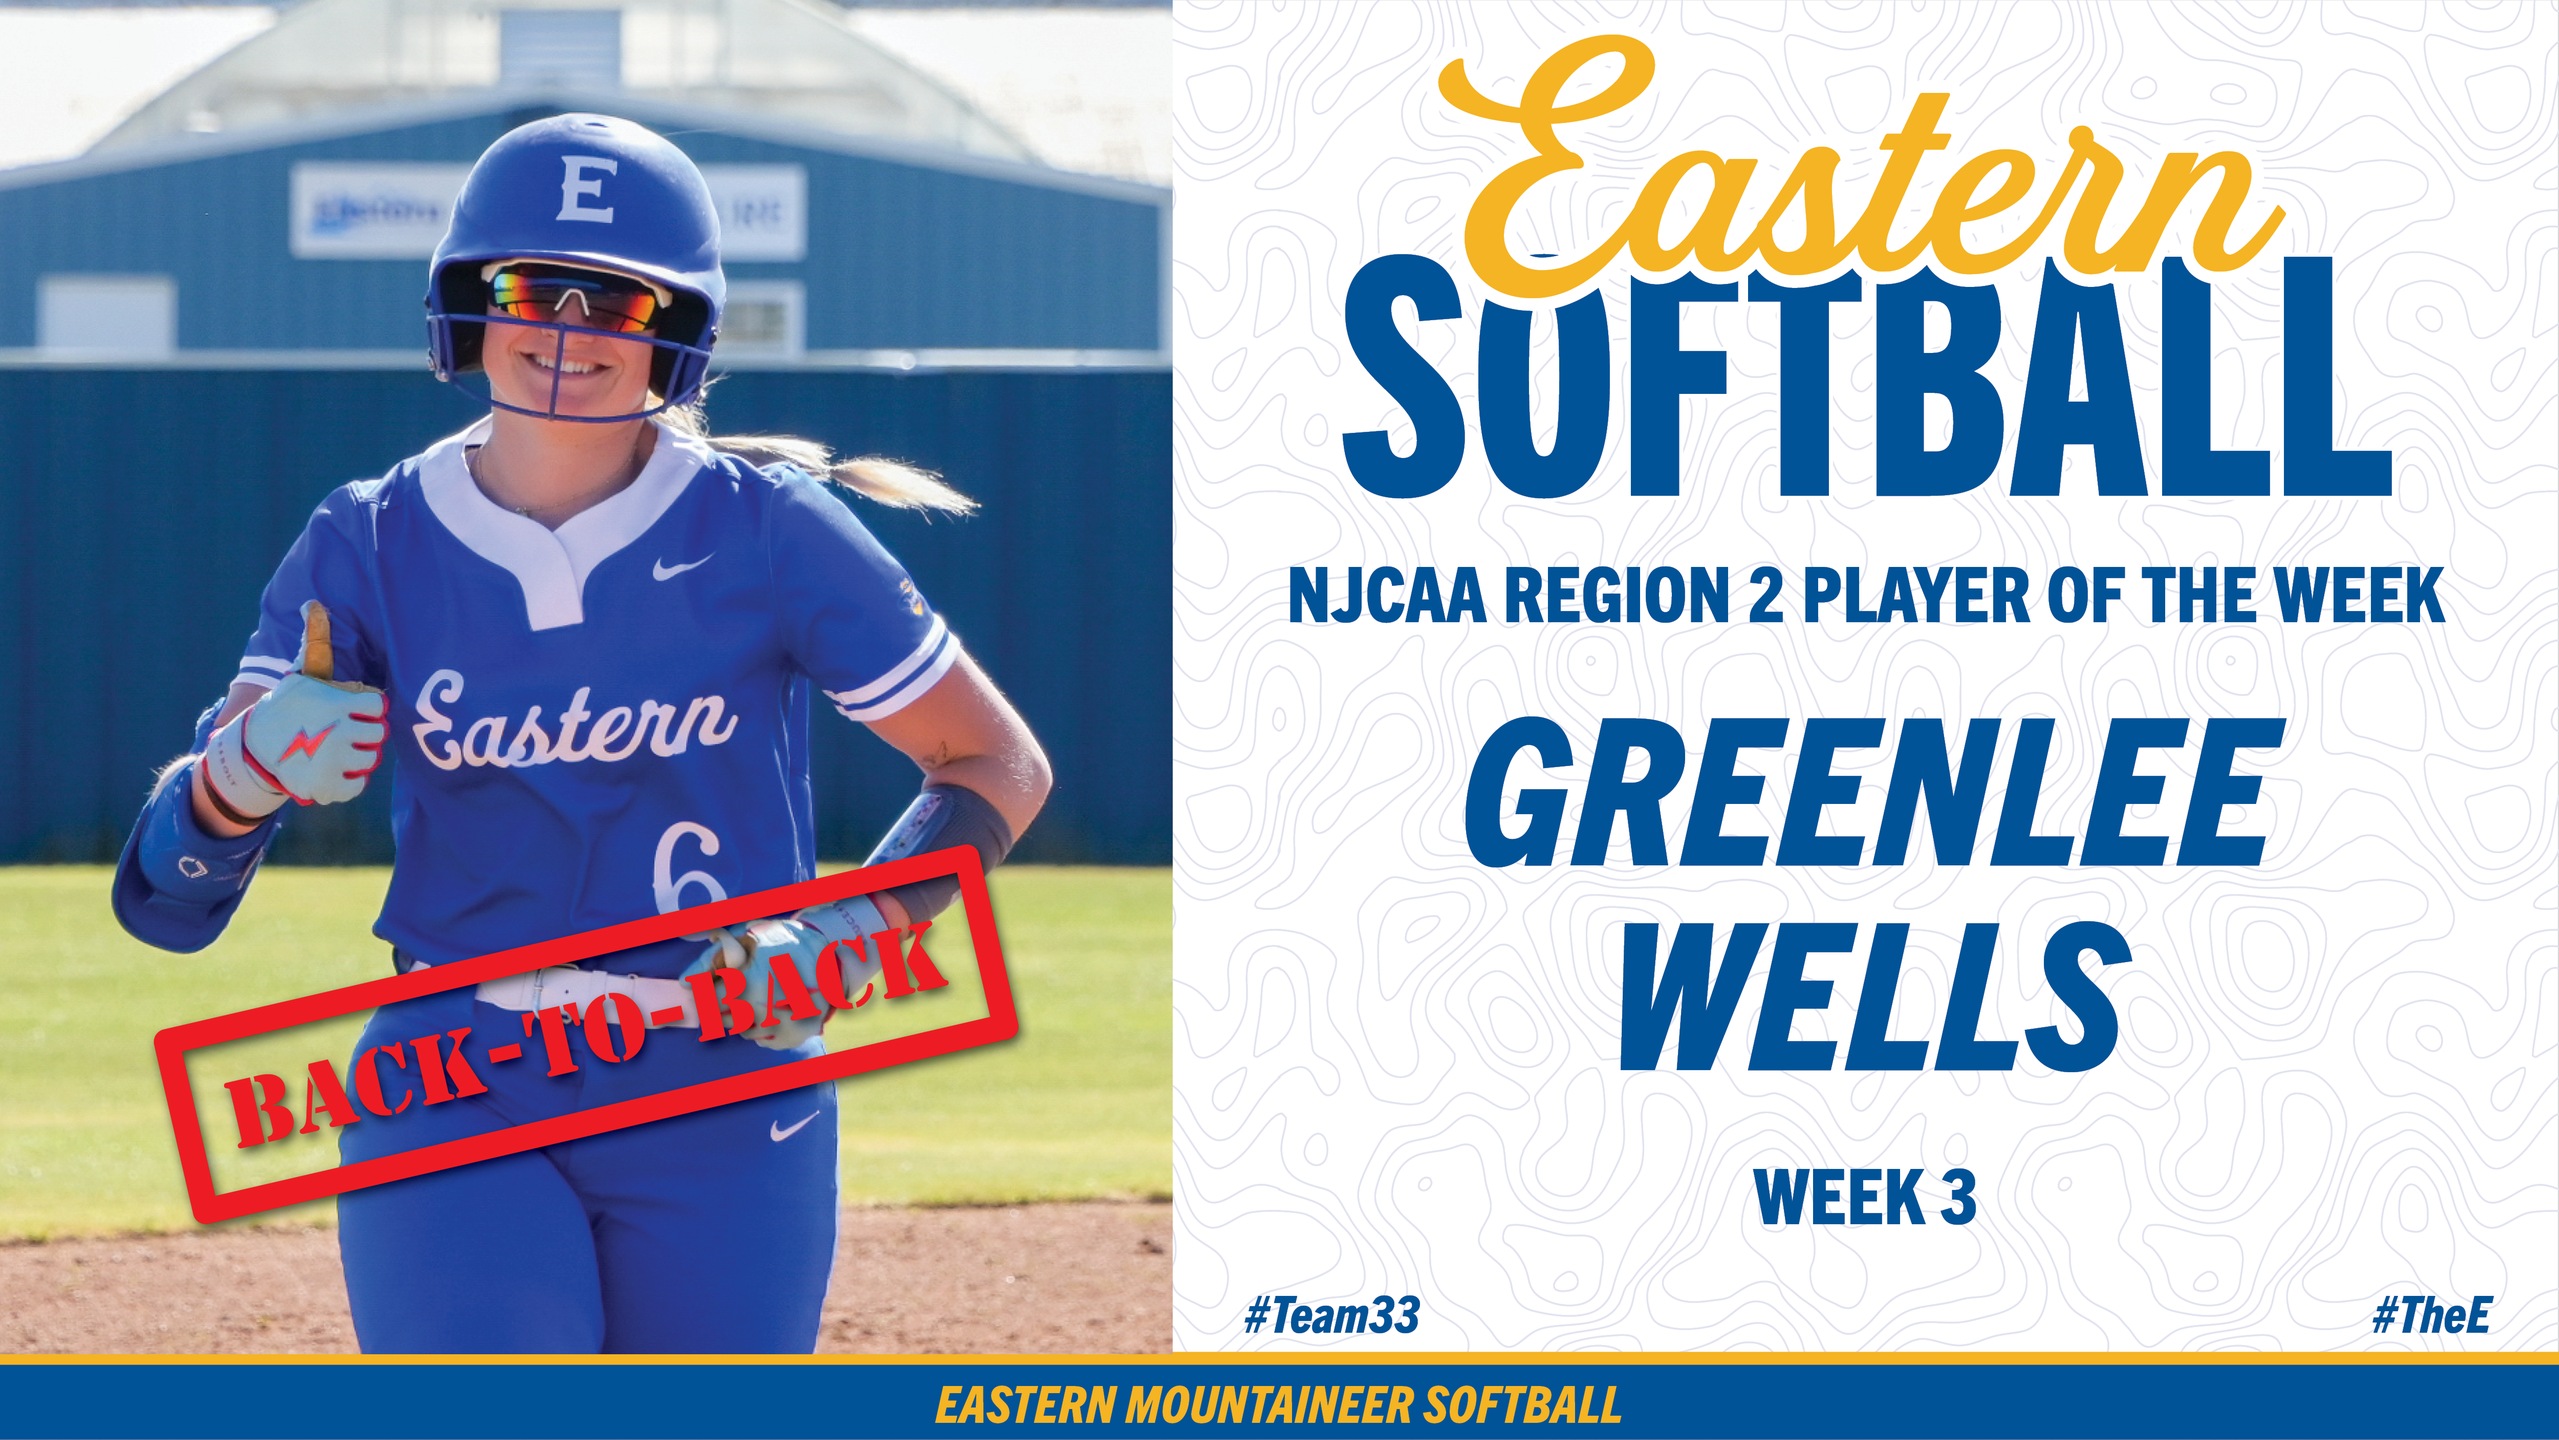 Greenlee Wells earns Second Straight Player of the Week honors